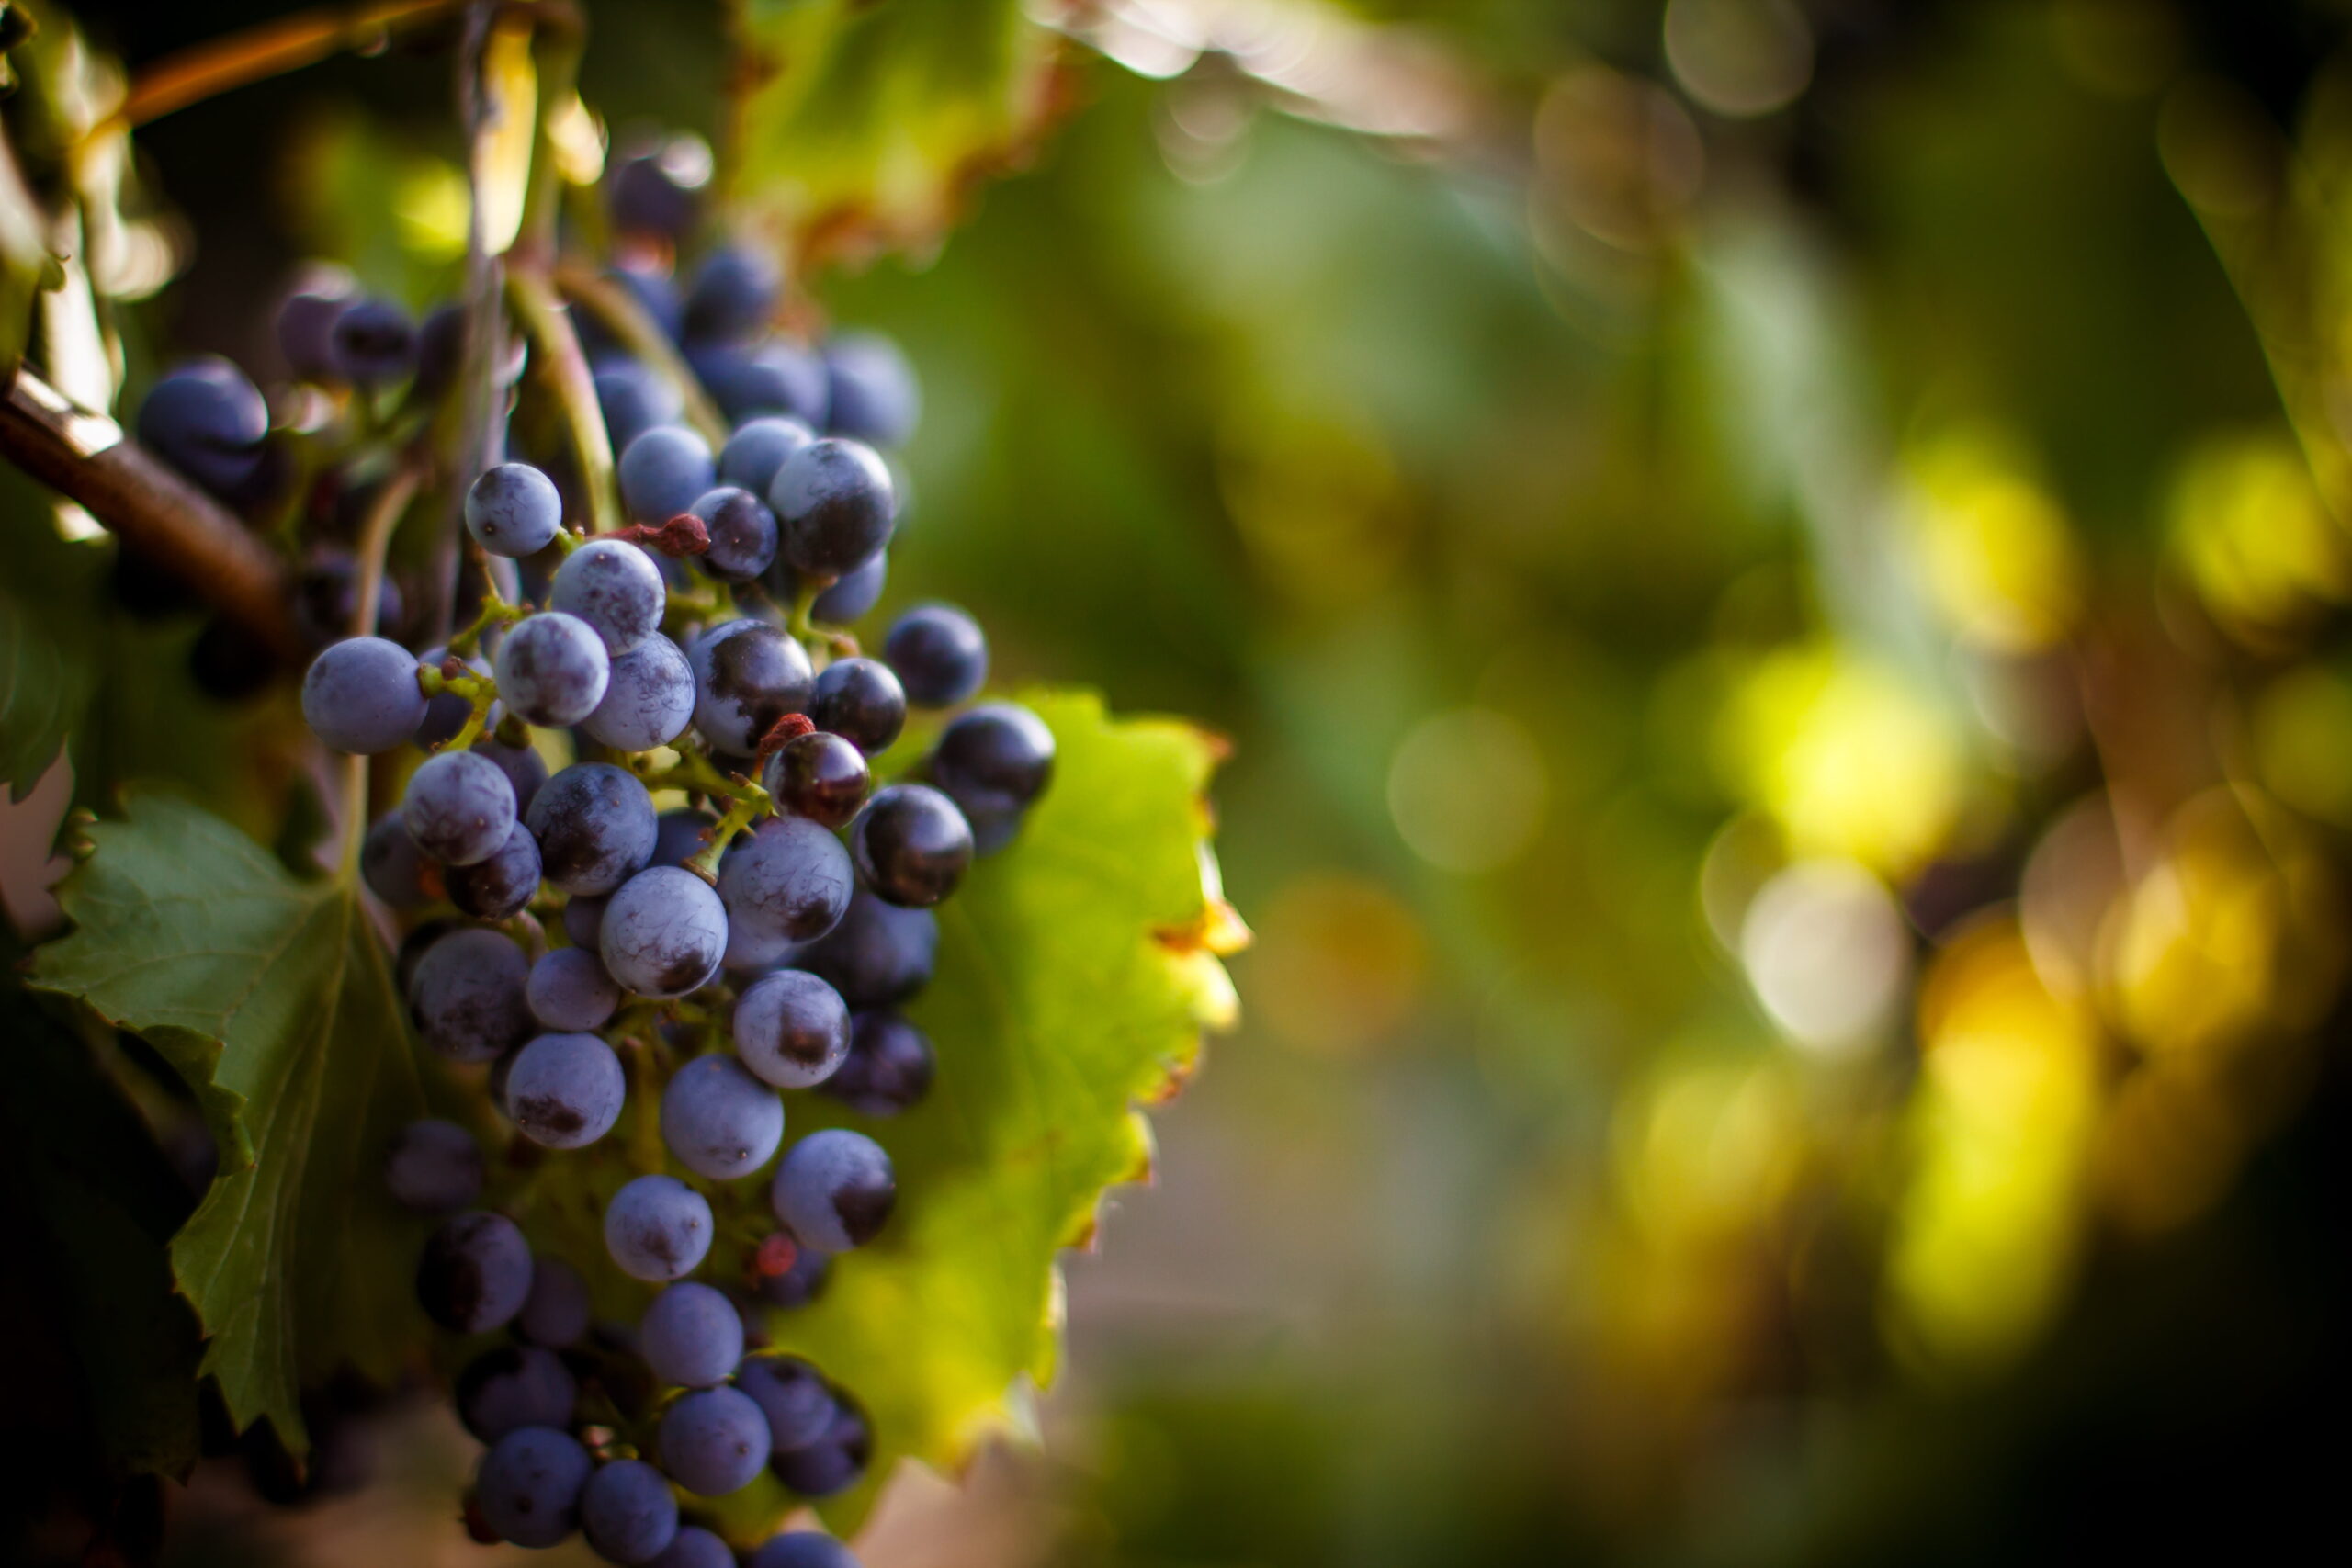 When is the Best Time to Plan a Trip to These Pocono Wineries?